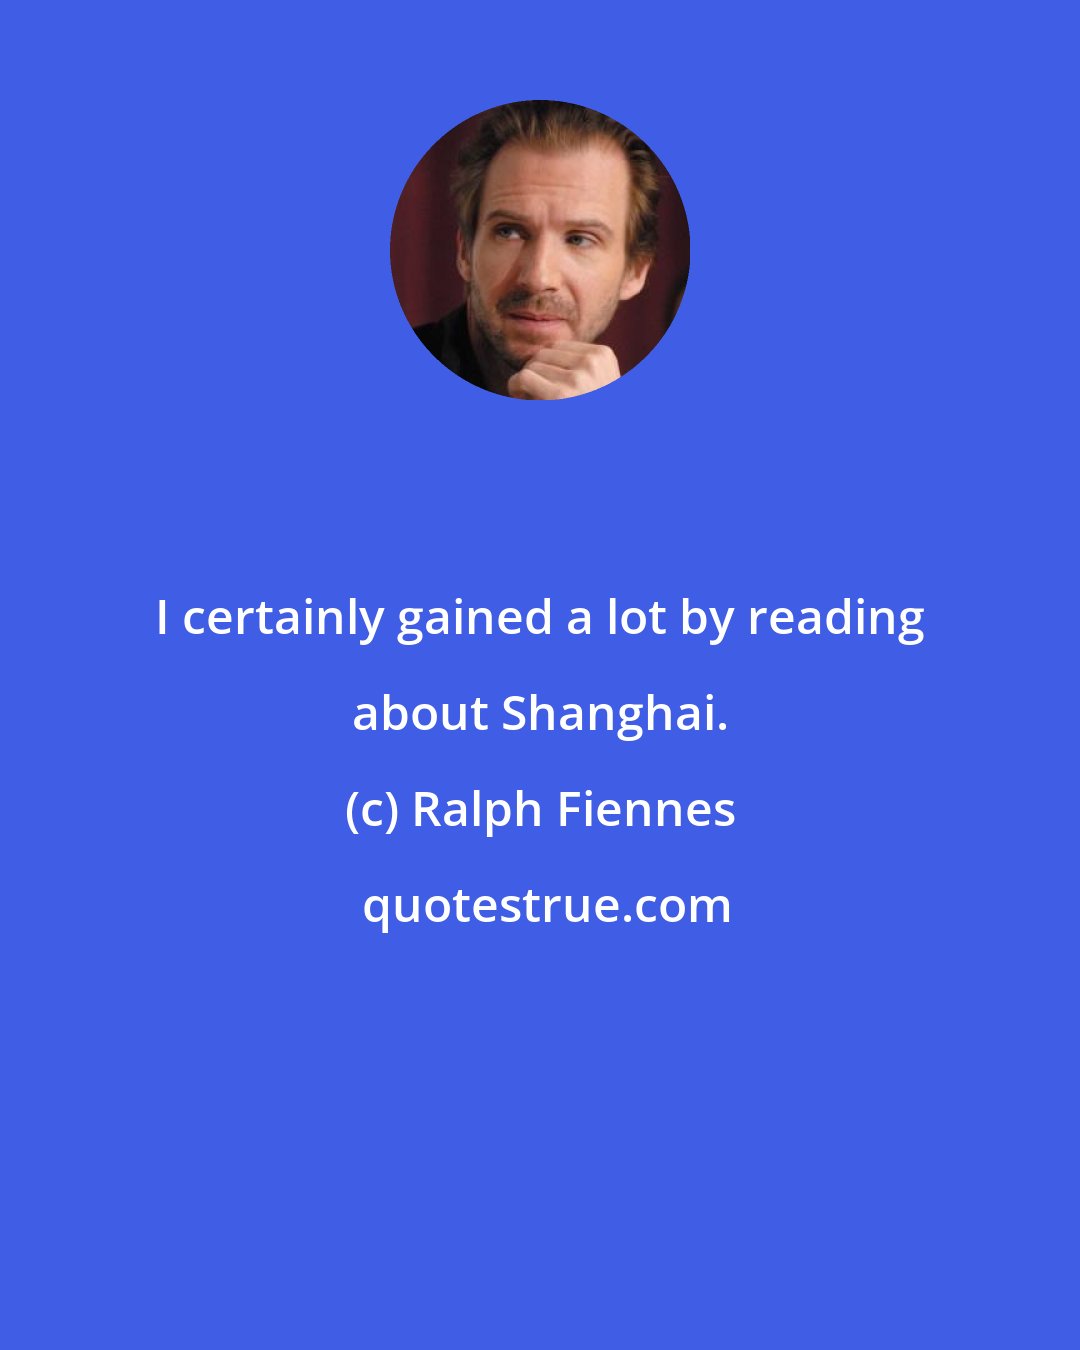 Ralph Fiennes: I certainly gained a lot by reading about Shanghai.